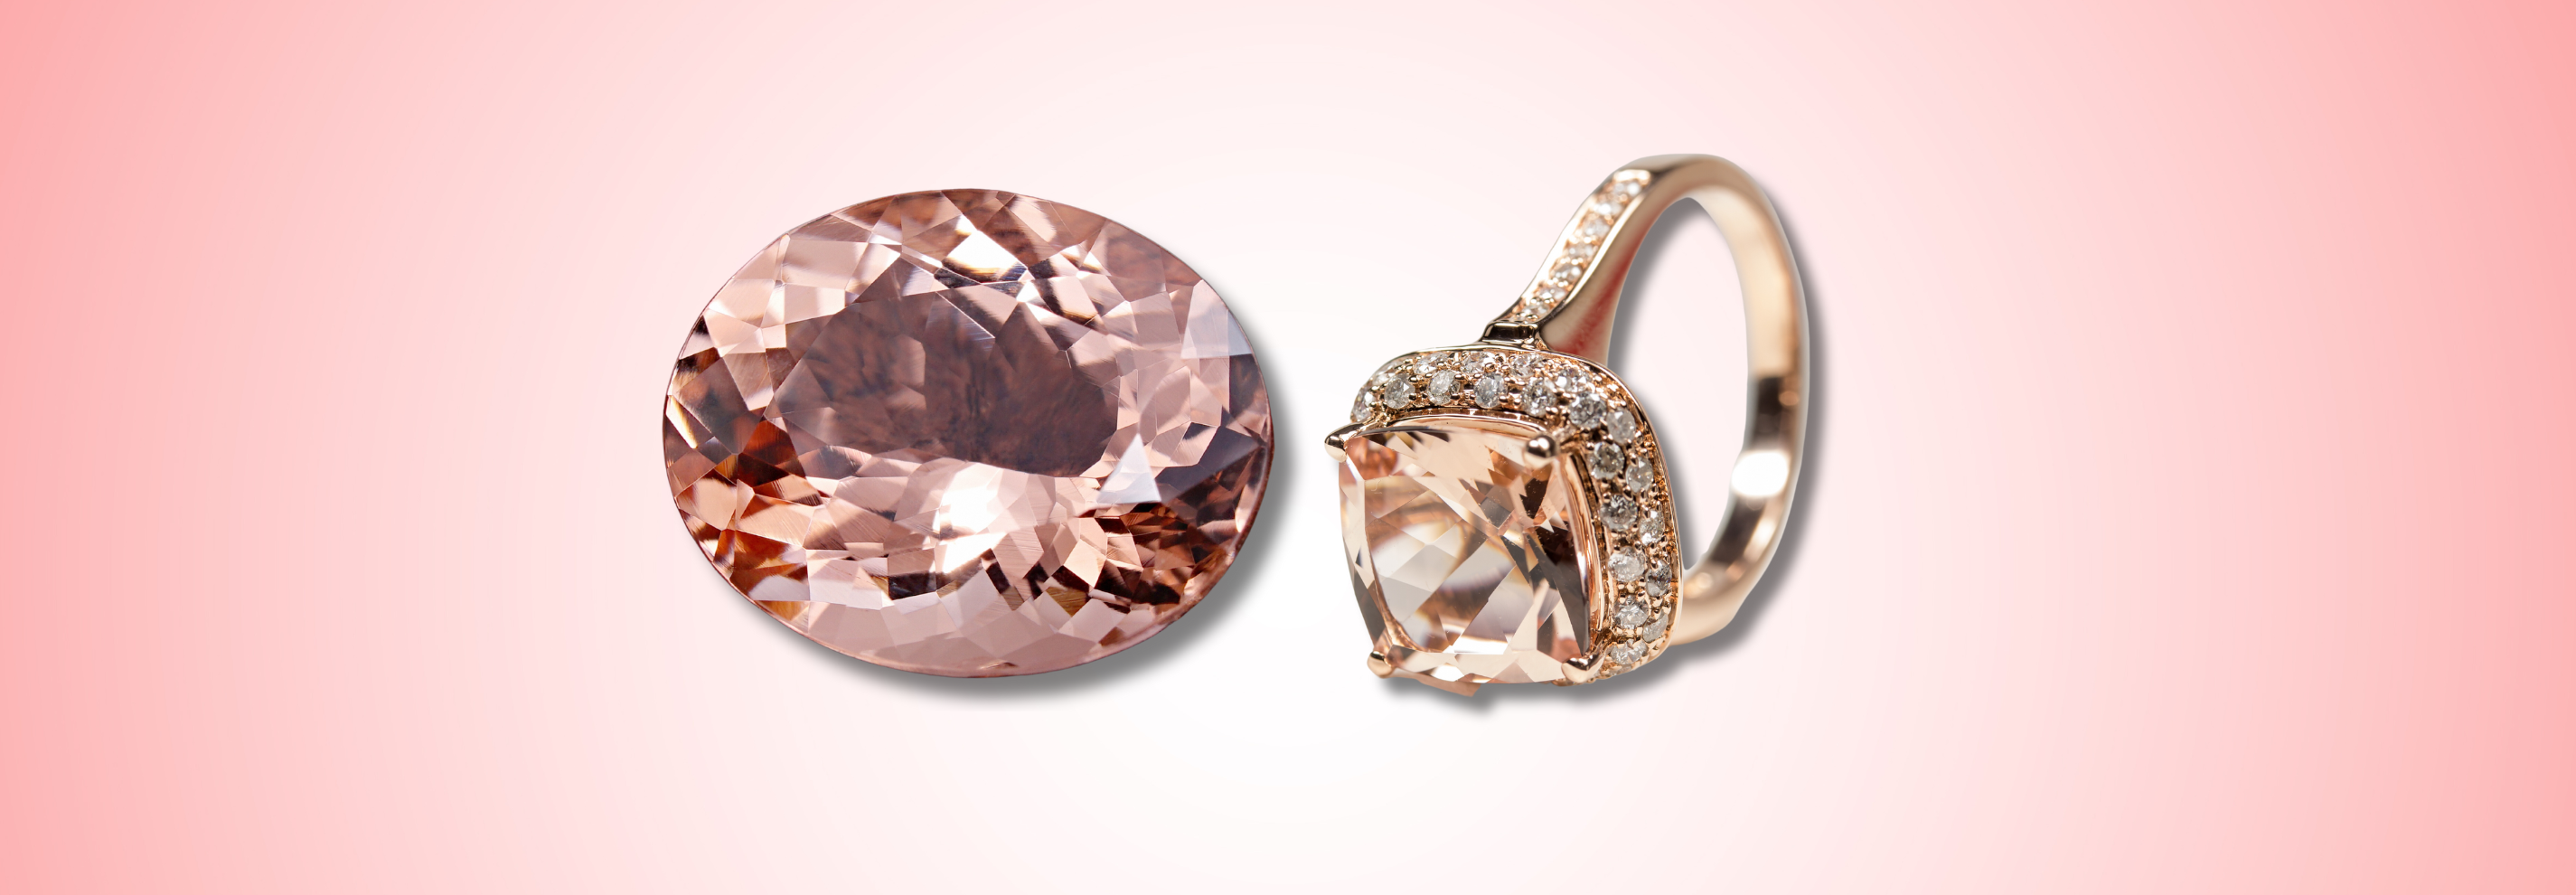 What is Morganite Gemstone and why is the color Pink?